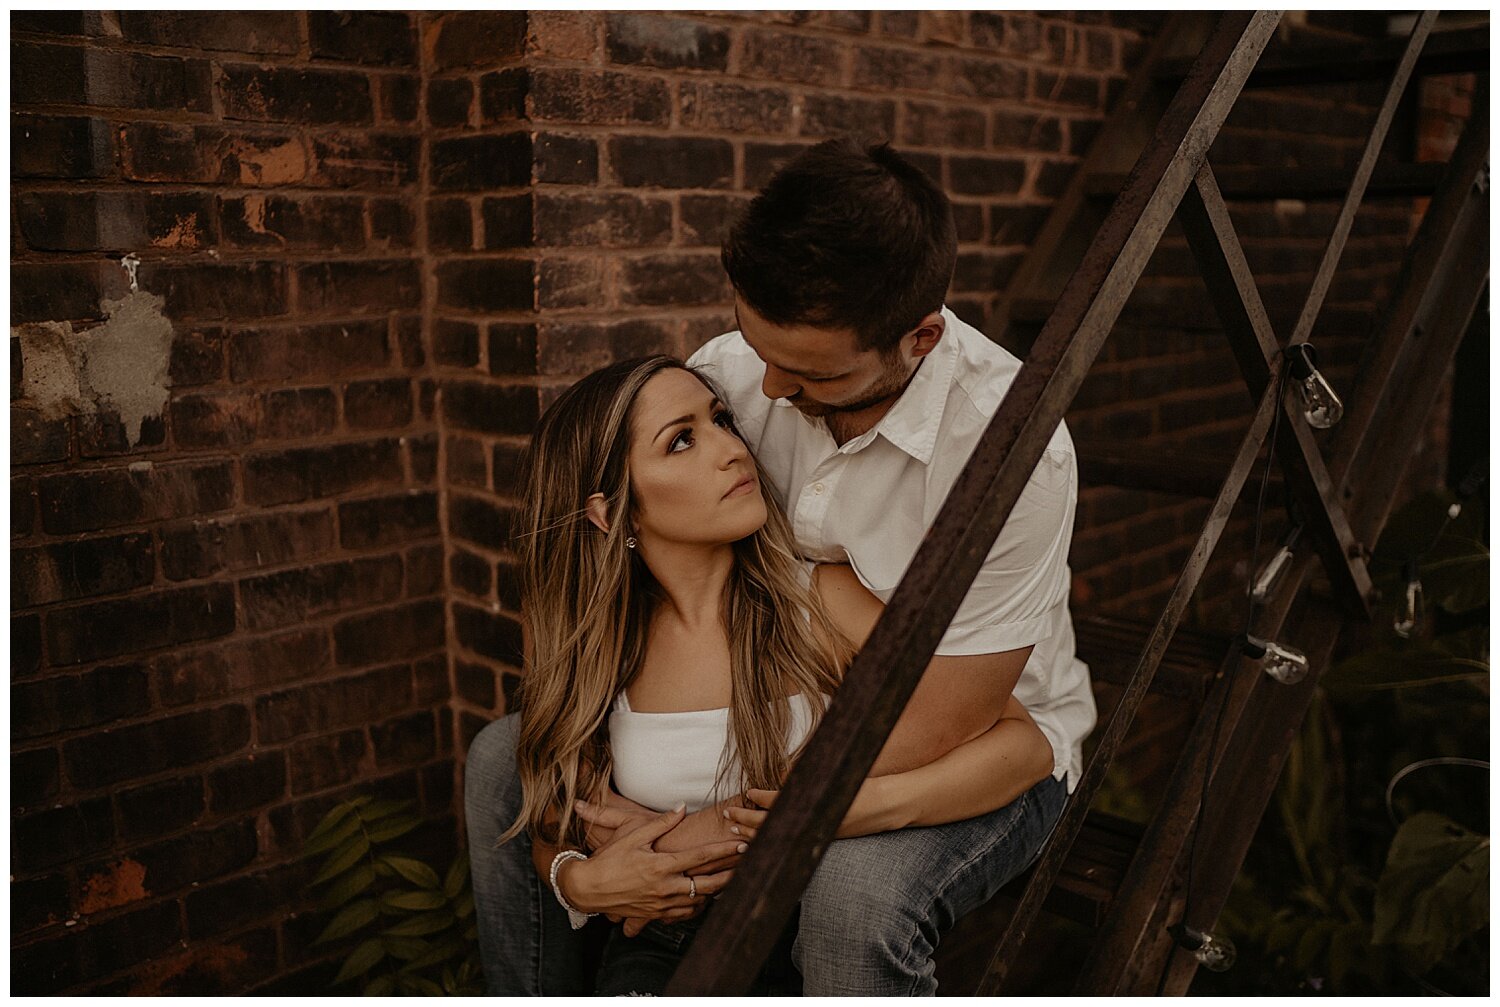 Cotton_Factory_And_Waterfall_Engagement_Session_Hamilton_Ontario_Wedding_Photographer_0085.jpg